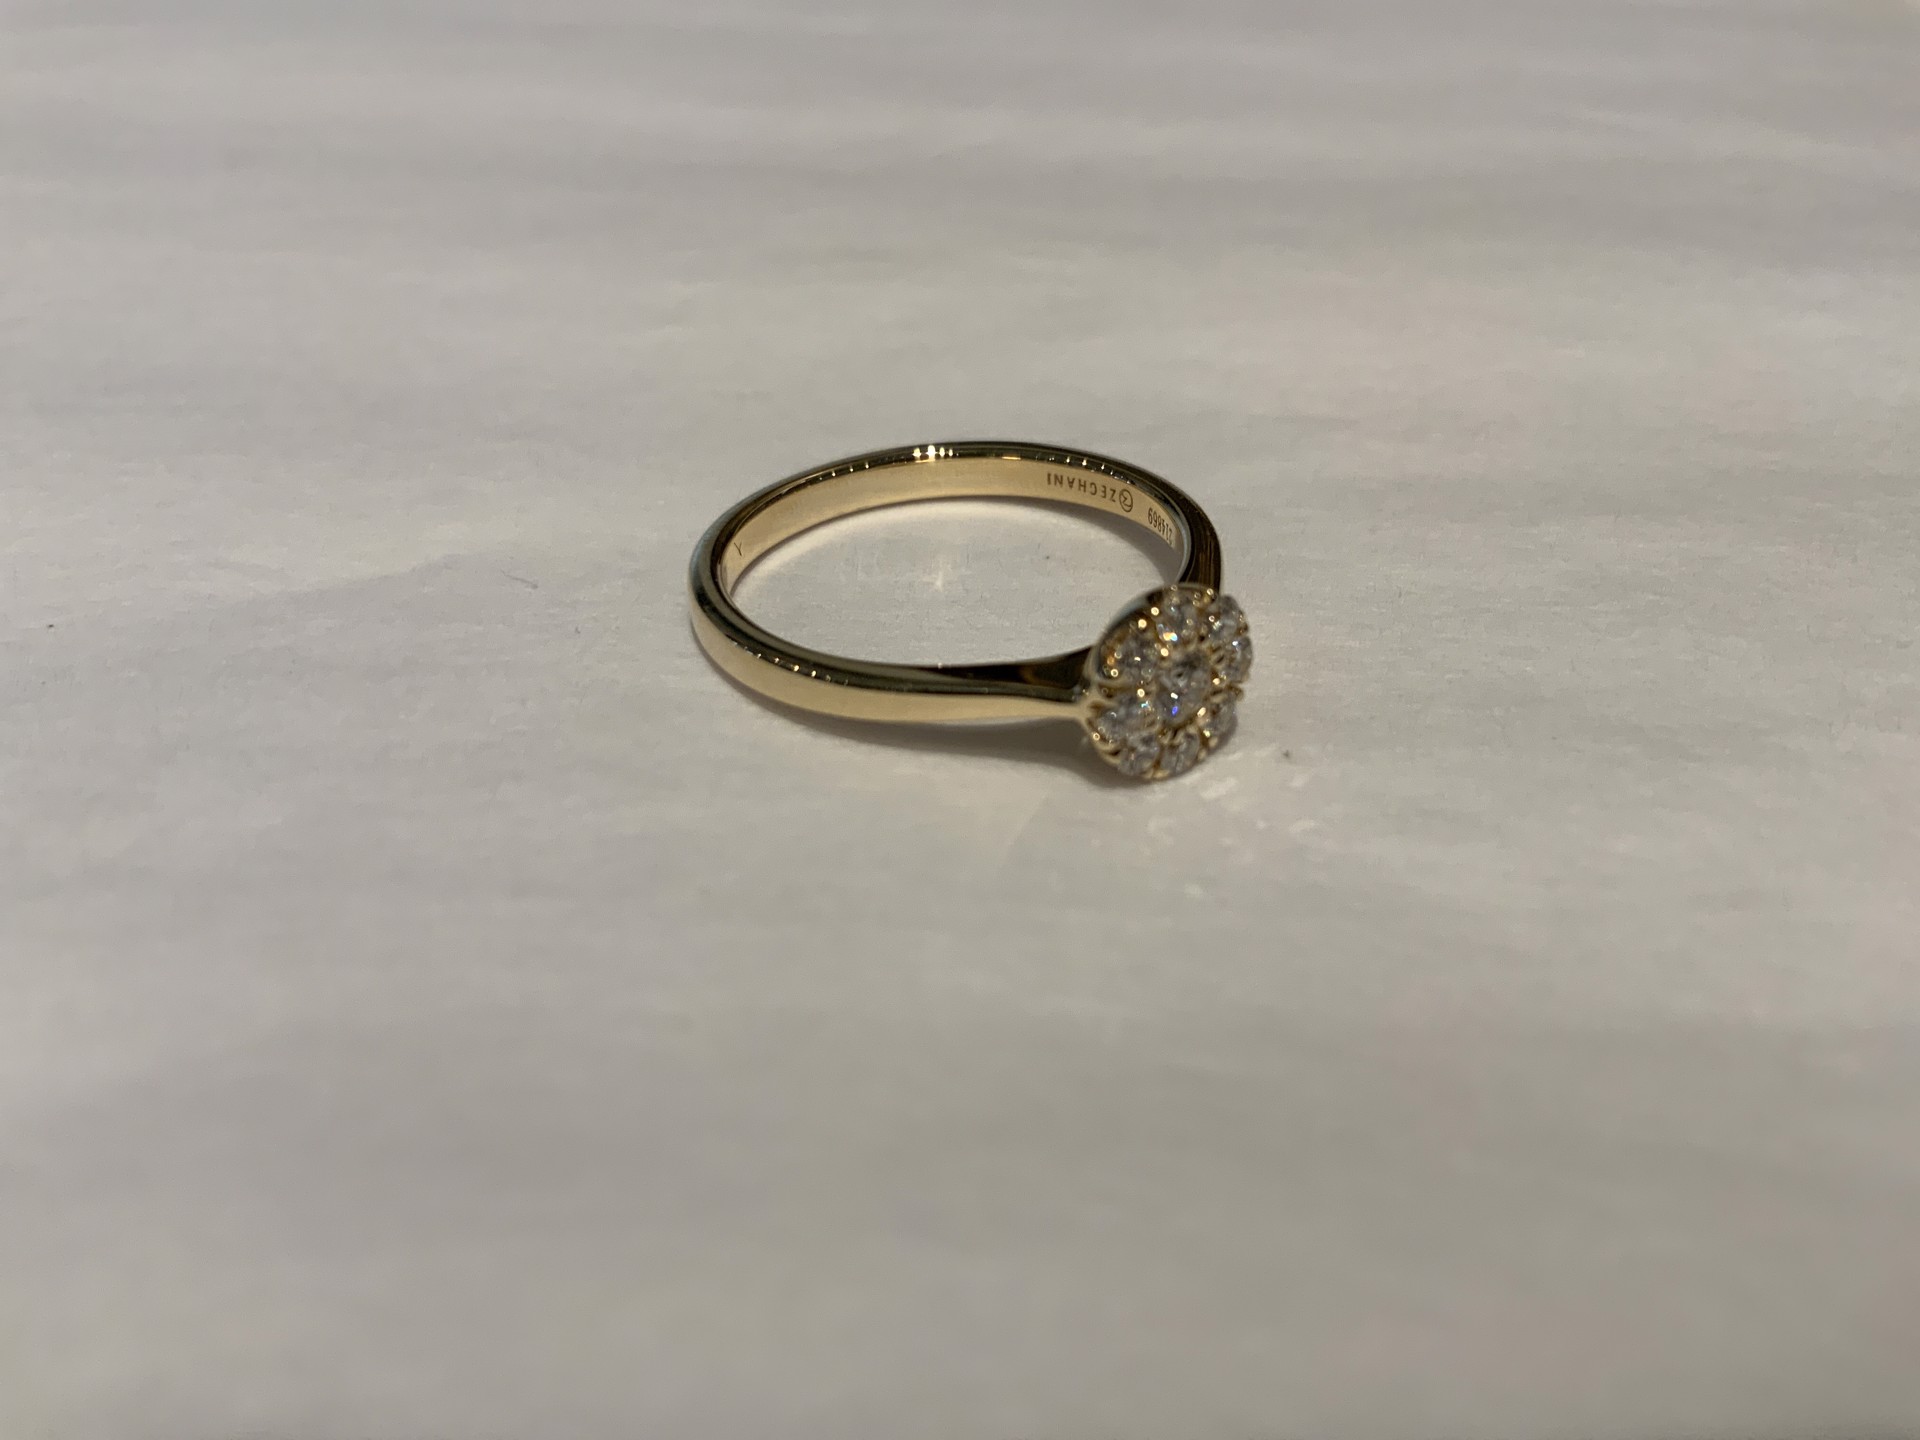 NGR131-Y 14k Gold and Diamond Ring by Zeghani